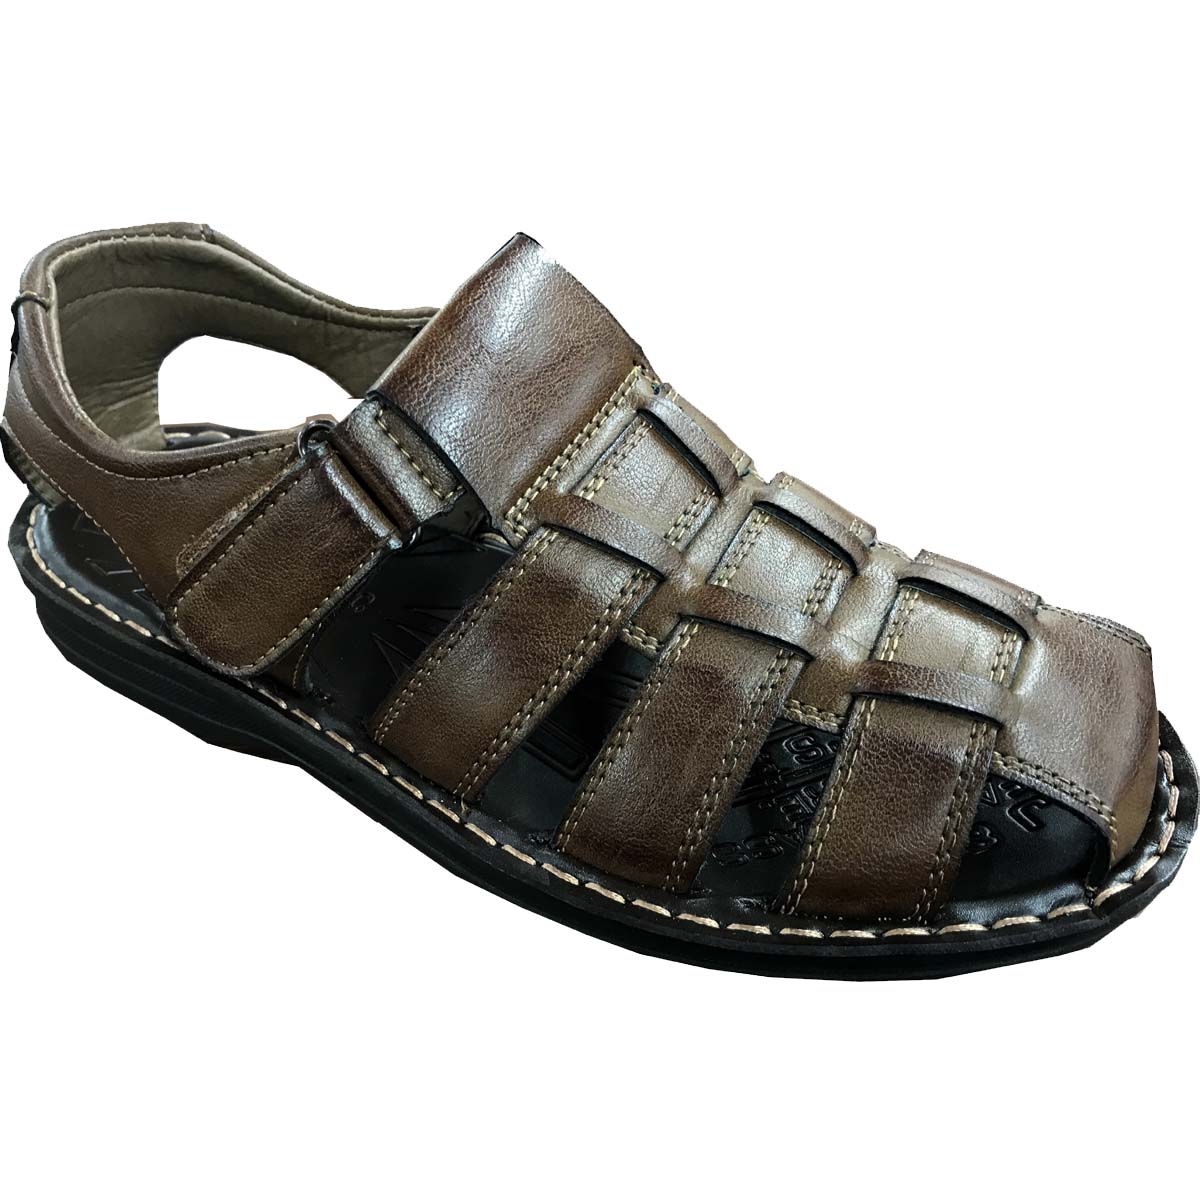 REPUBLIC | KRAZY SHOES ARTISTS CLOSE BACK SANDAL WITH VELCRO STRAPS IN ...